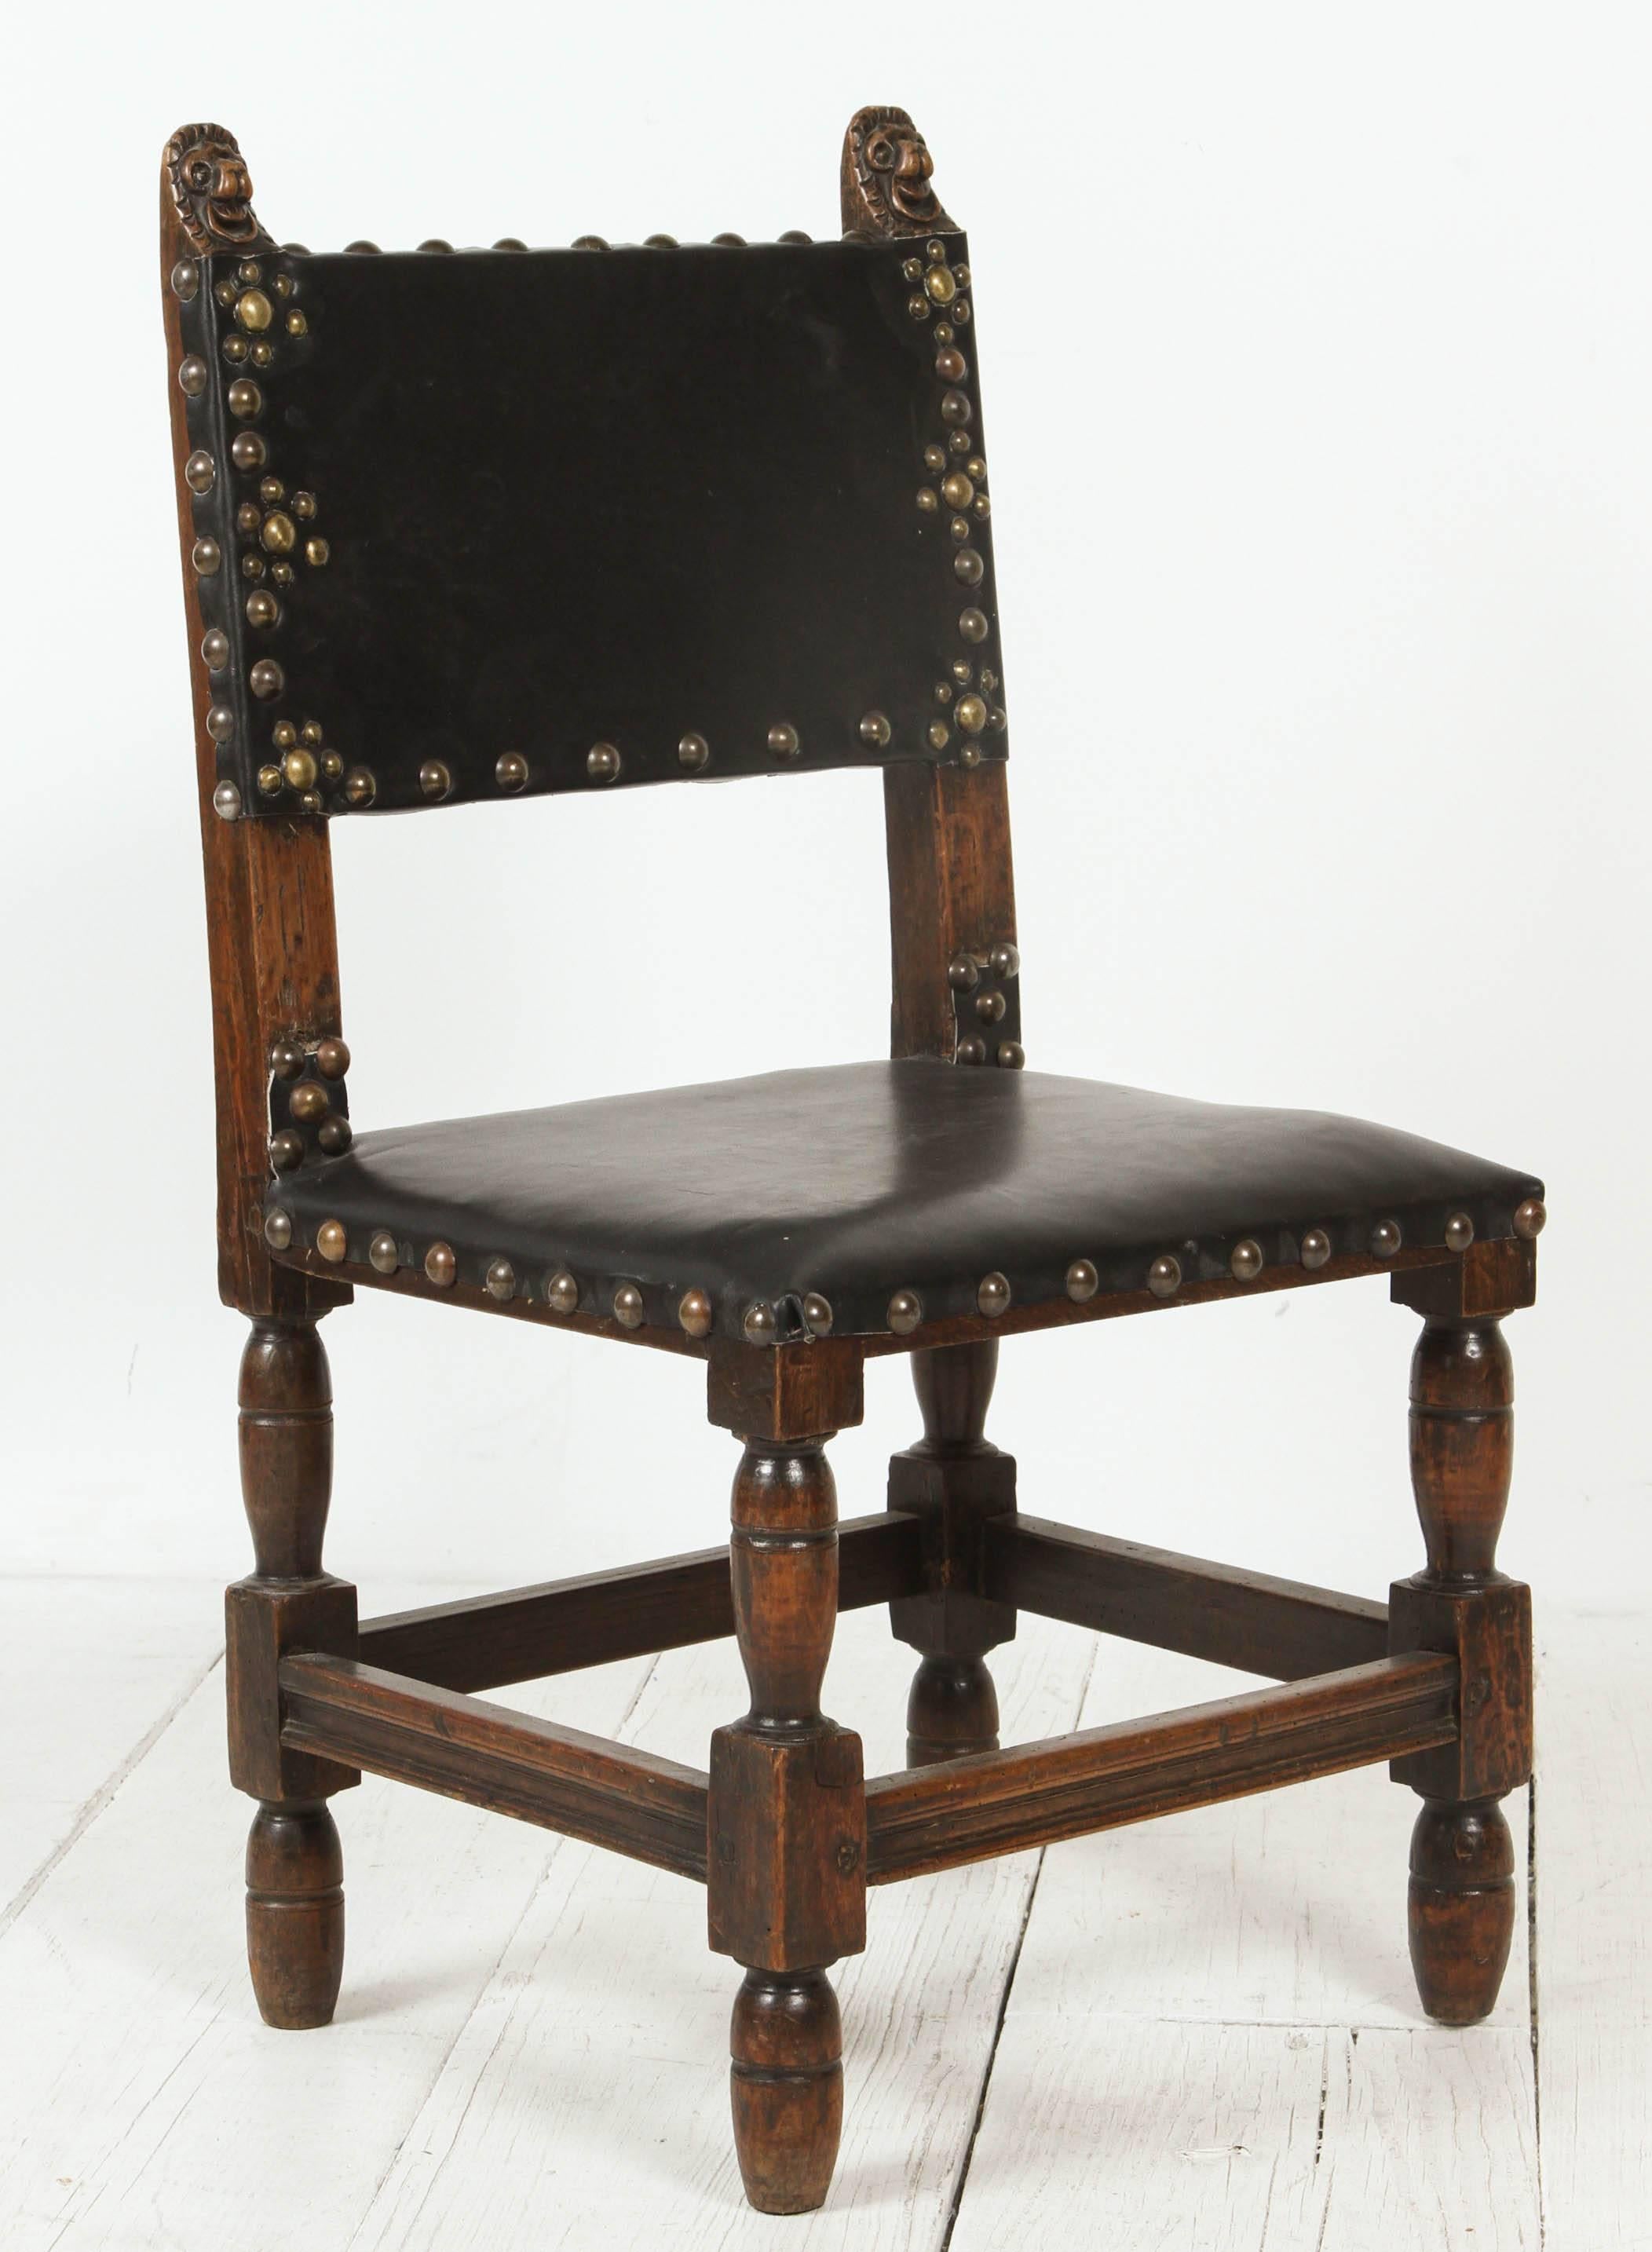 Wood framed Spanish chairs upholstered in leather finished with nailhead embellishment.